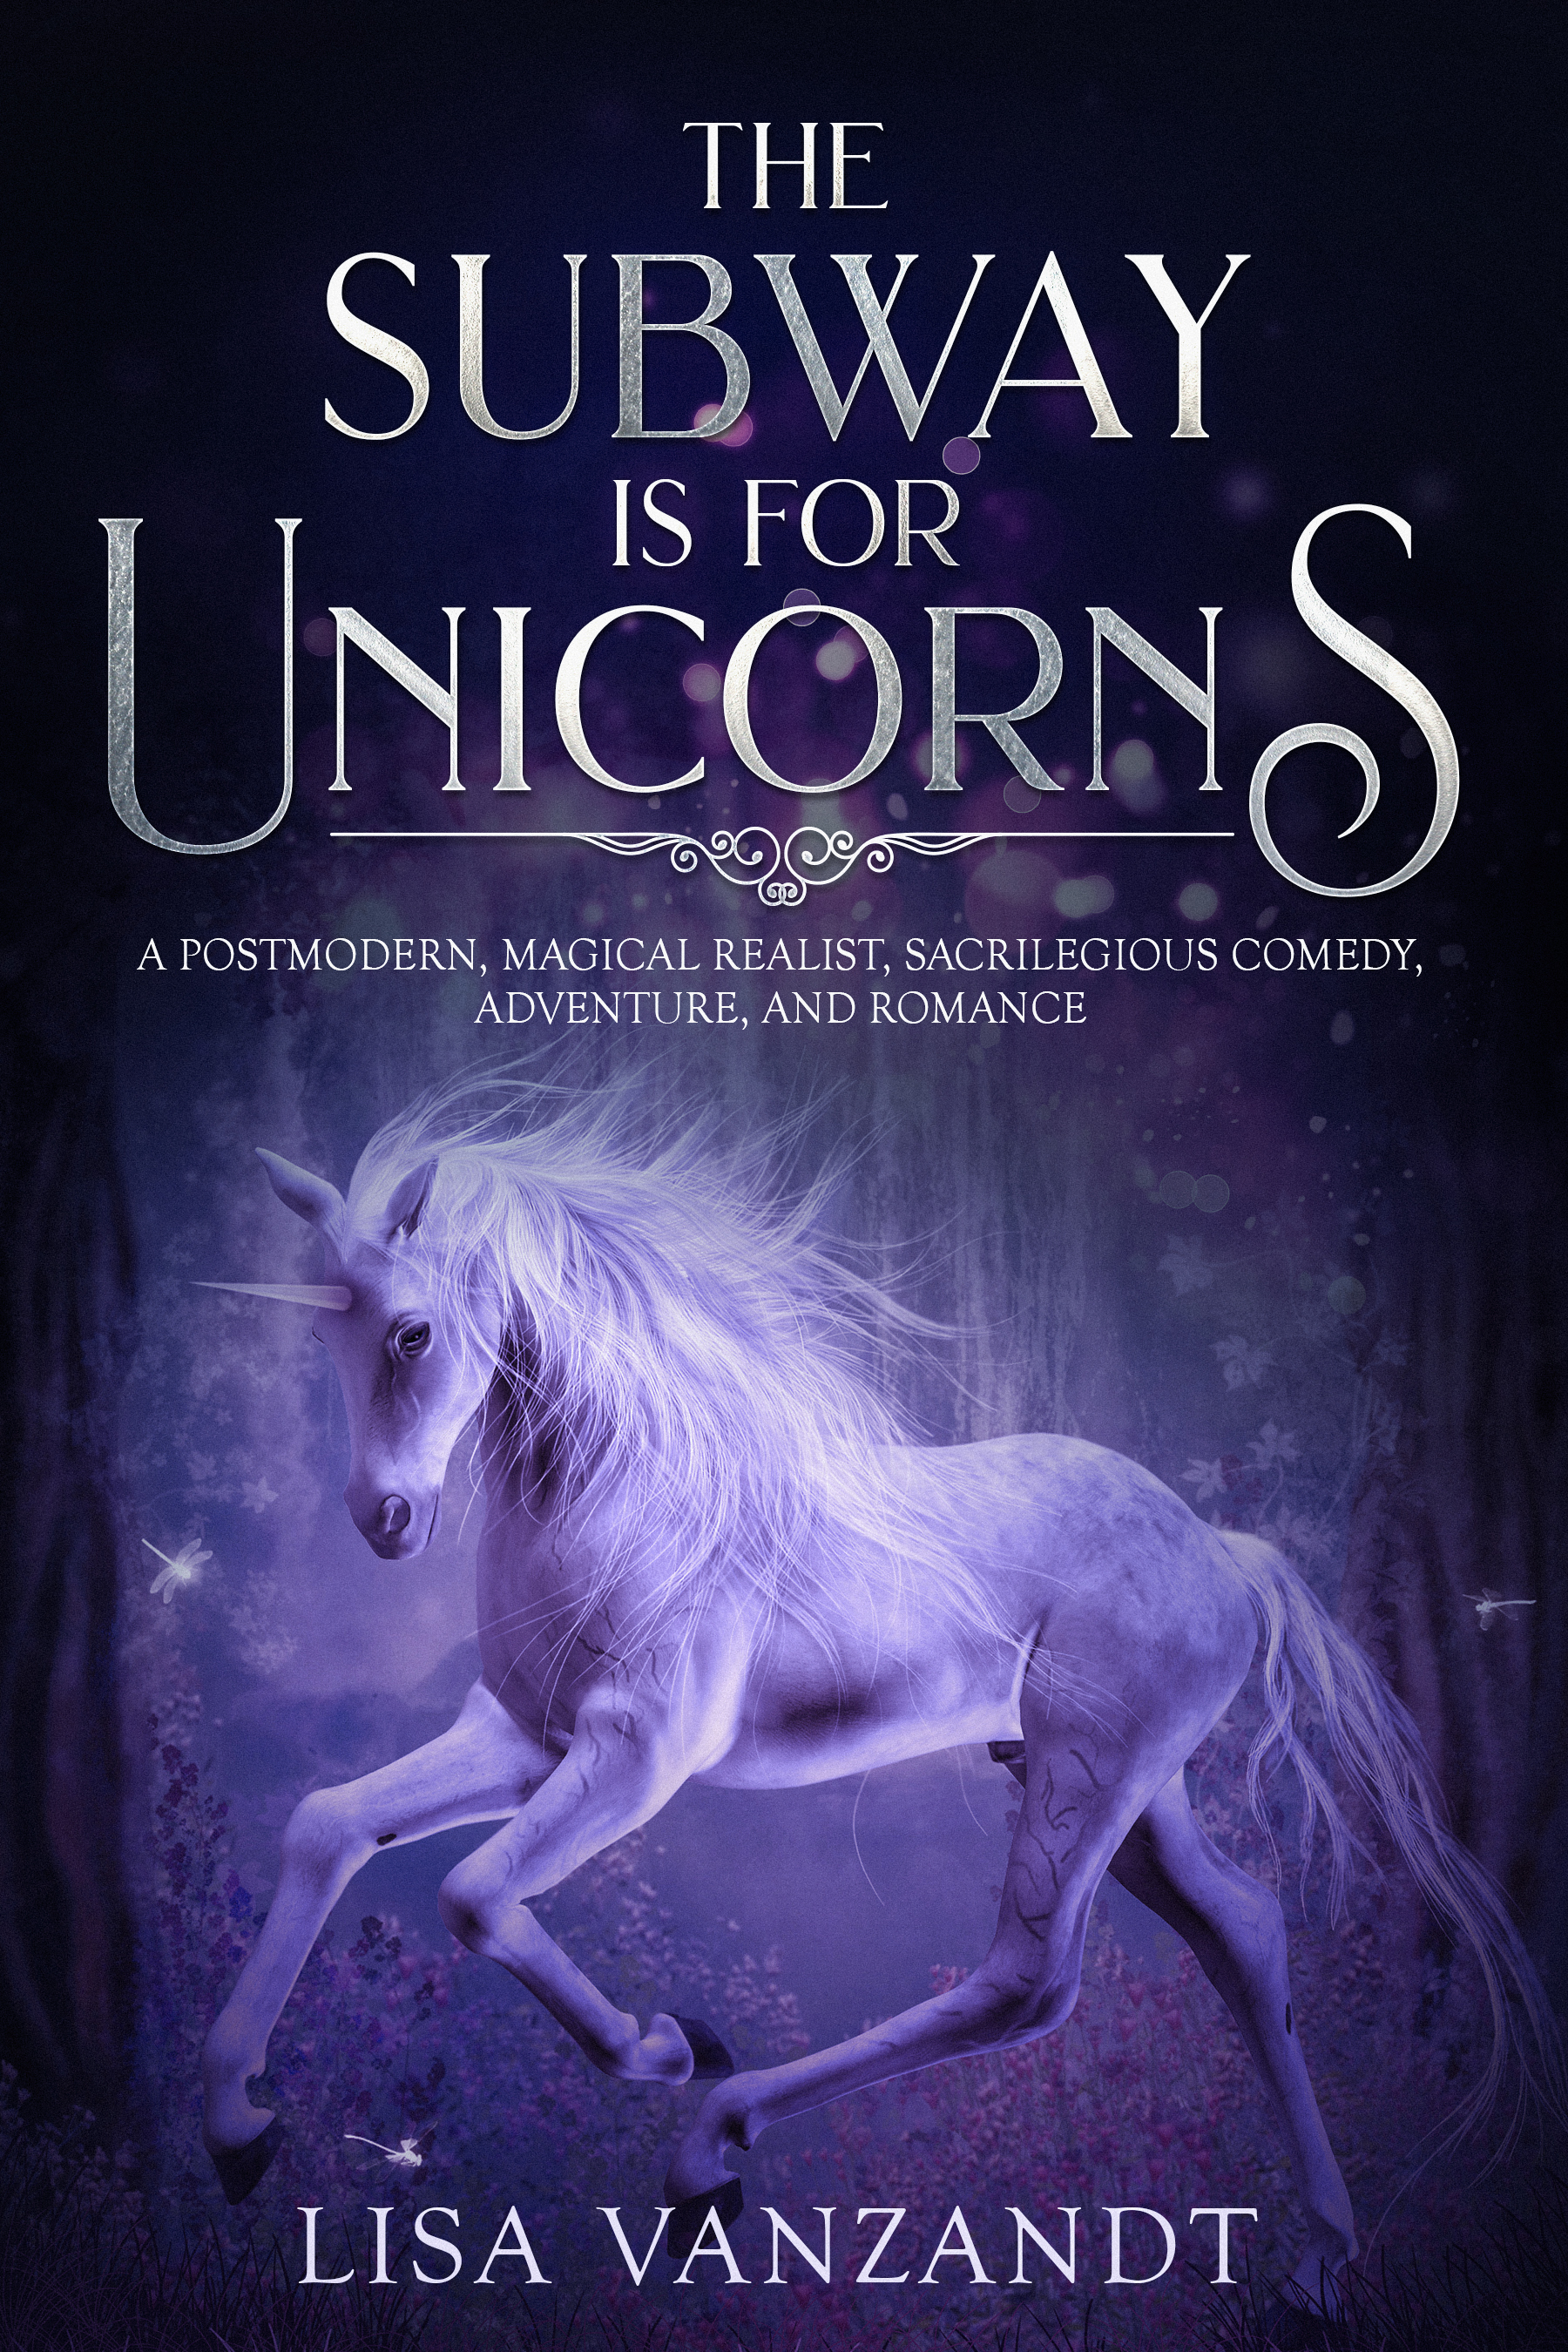 FREE: The Subway Is for Unicorns: A Postmodern, Magical Realist, Sacrilegious Comedy, Adventure, and Romance by Lisa VanZandt